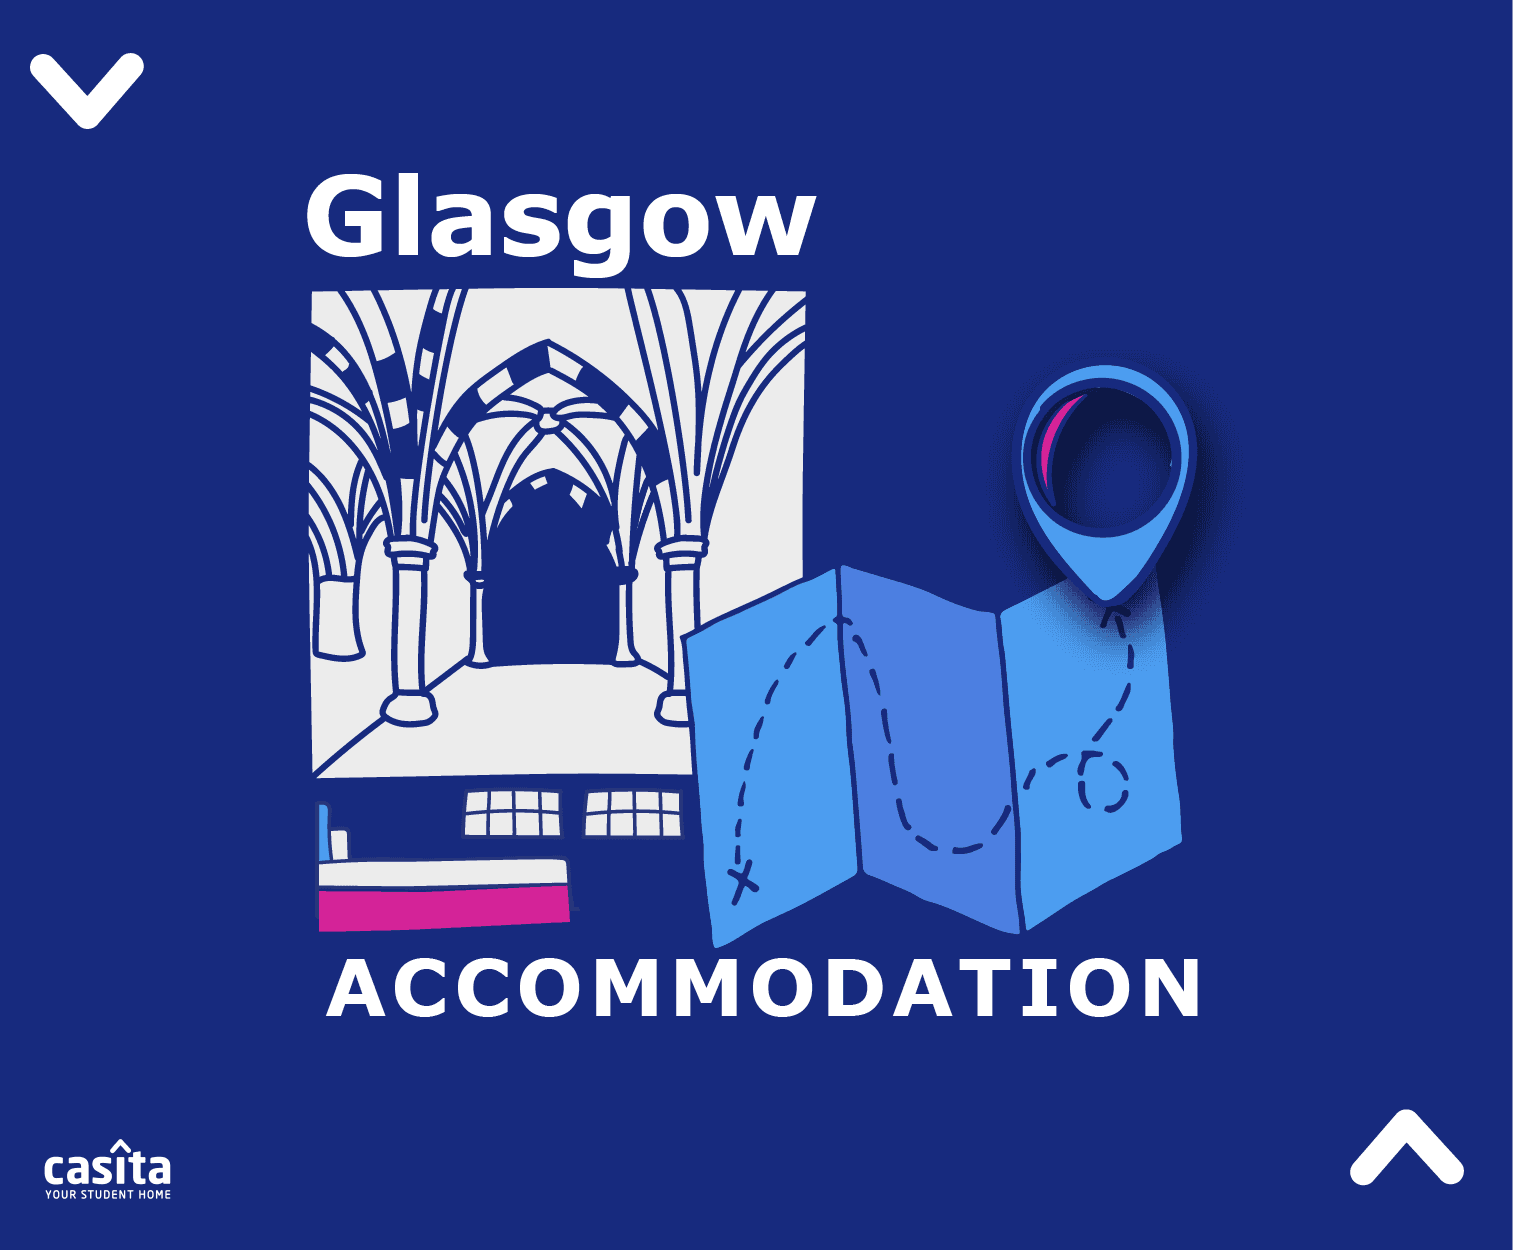 Where to Find University of Glasgow Accommodation?